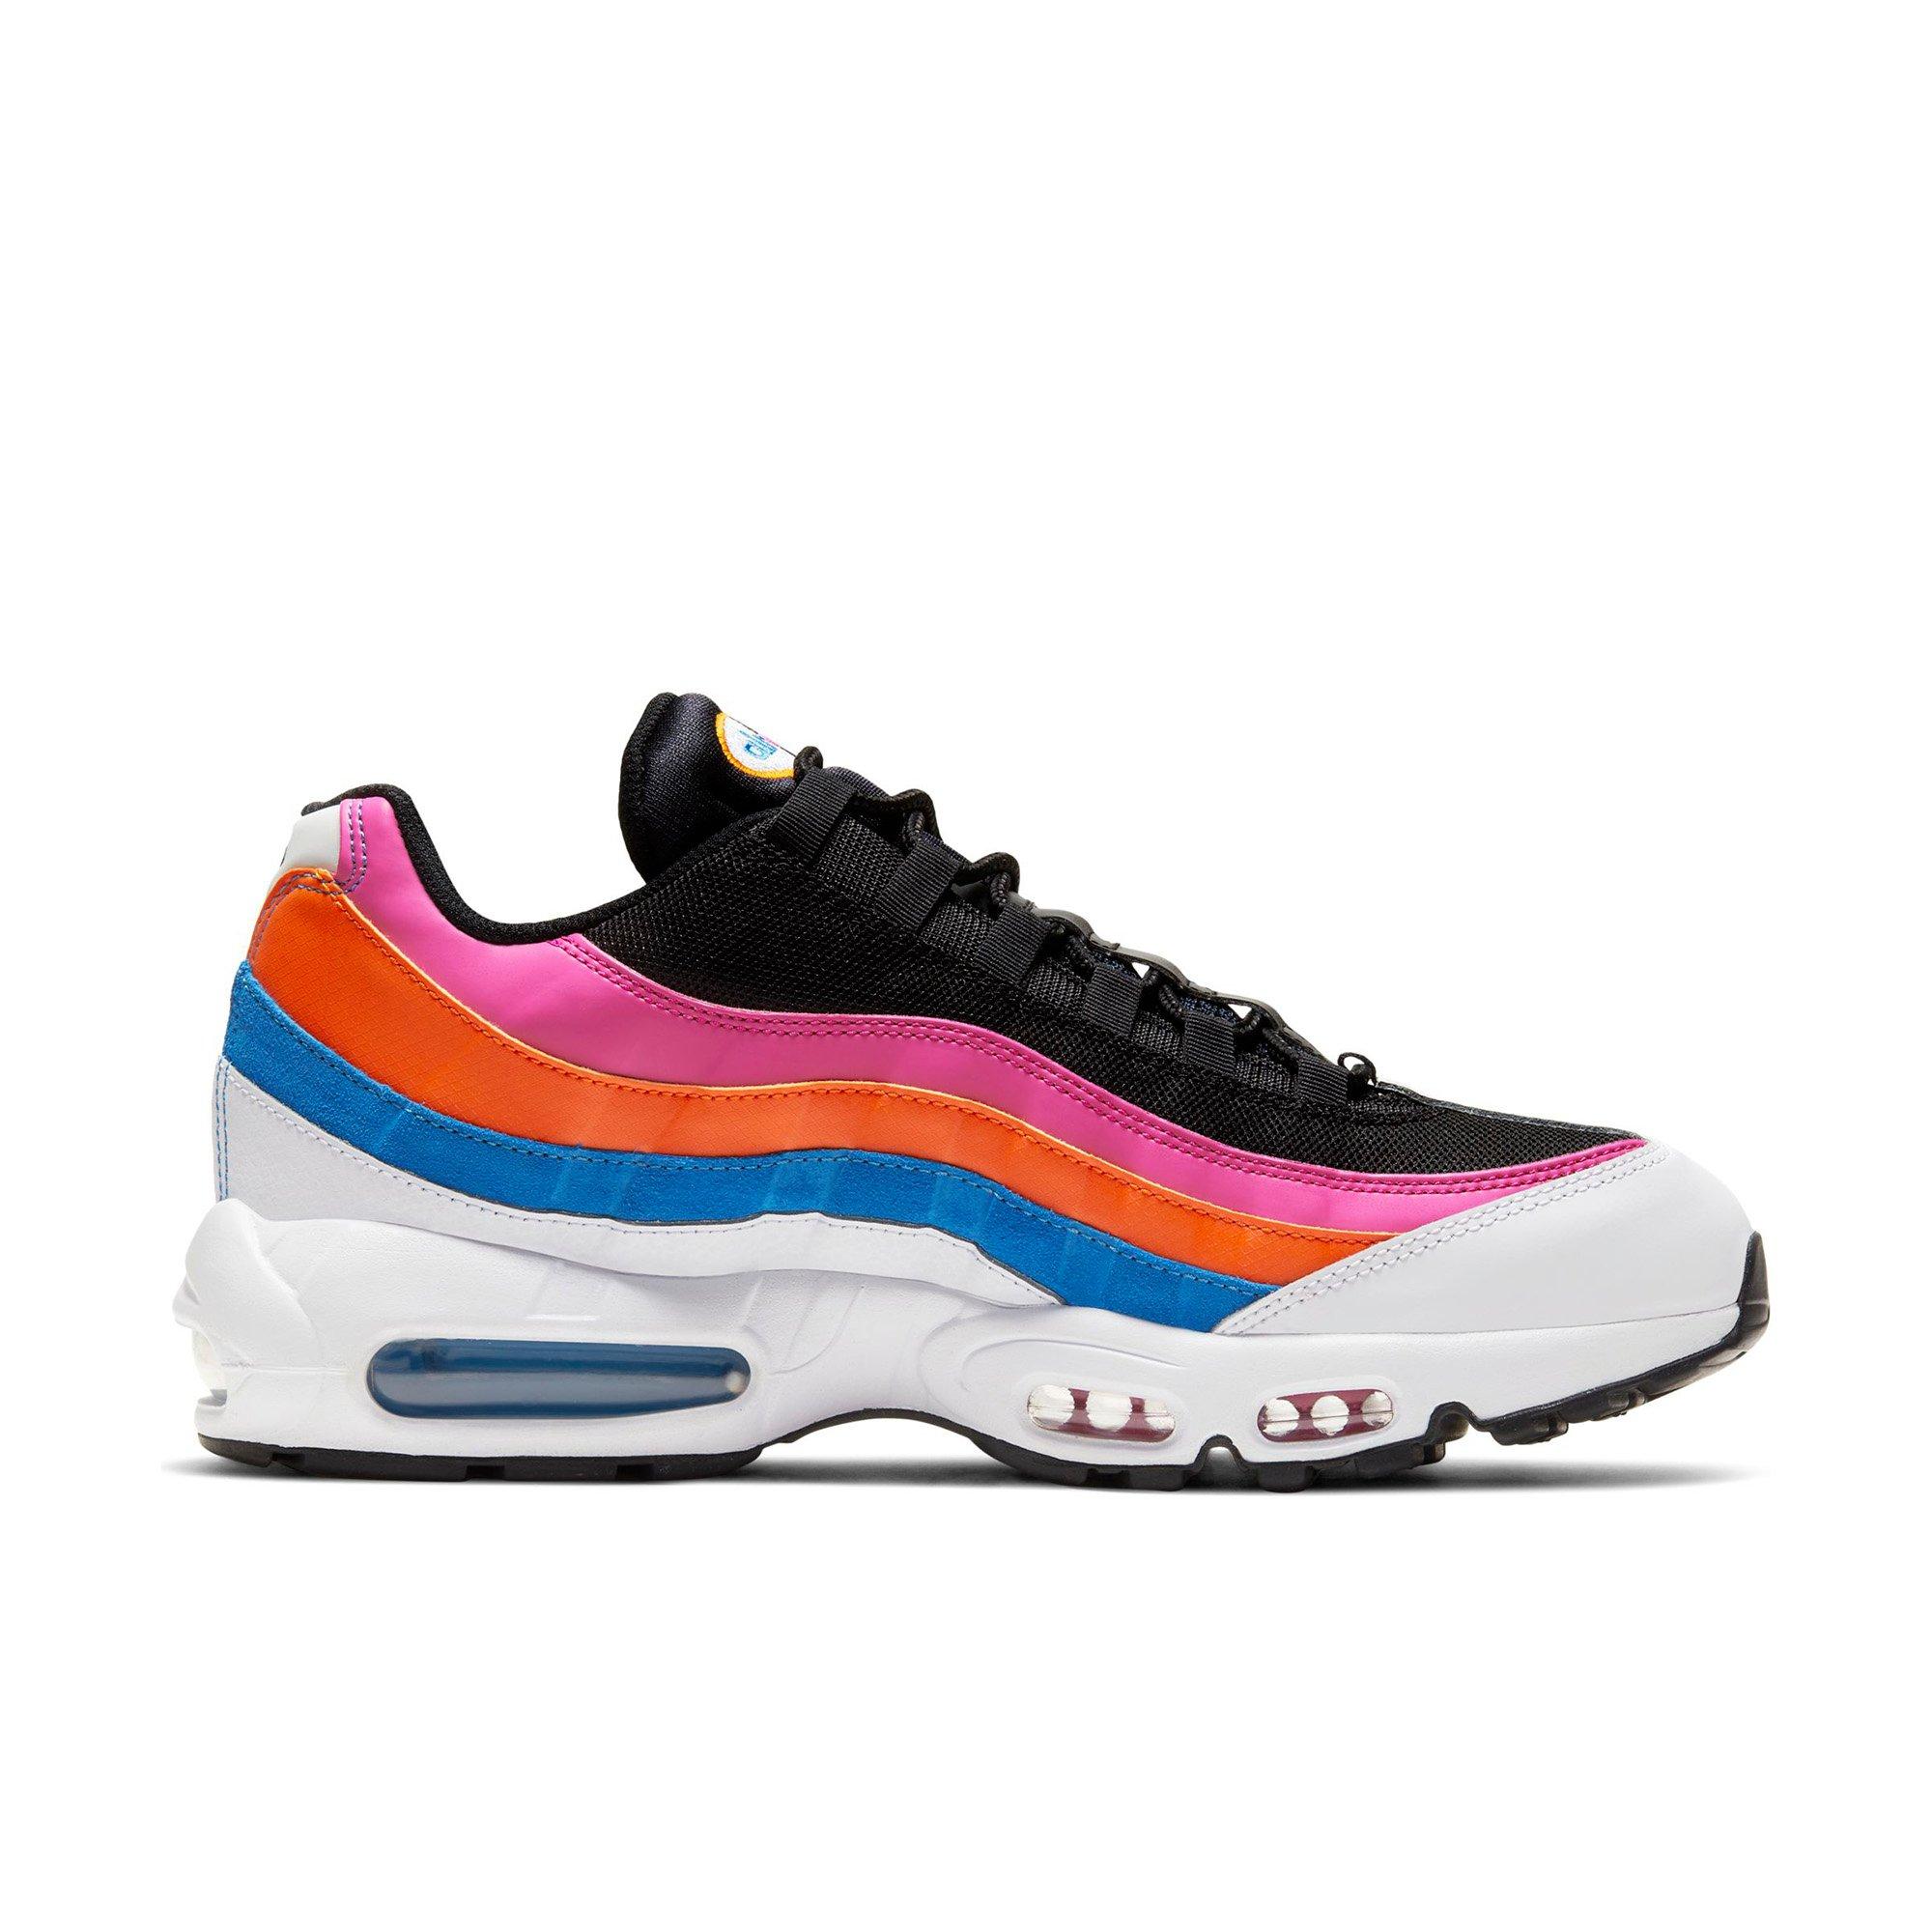 nike 95 pink and white